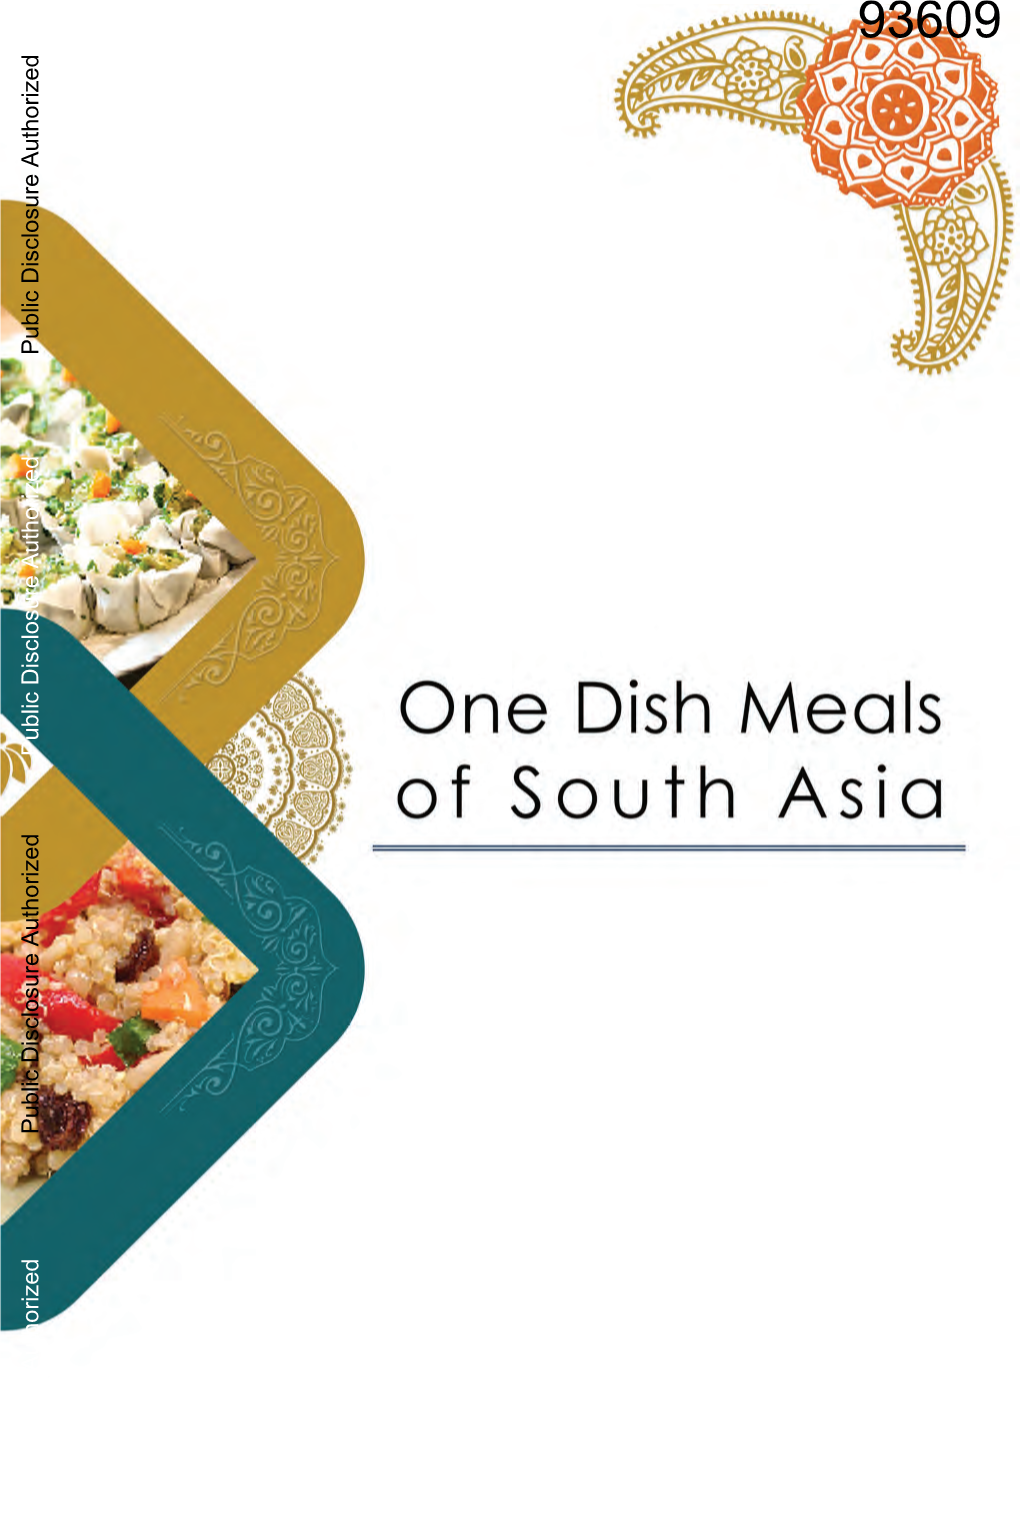 One Dish Meals of South Asia 3 One Dish Meals: the Beginning